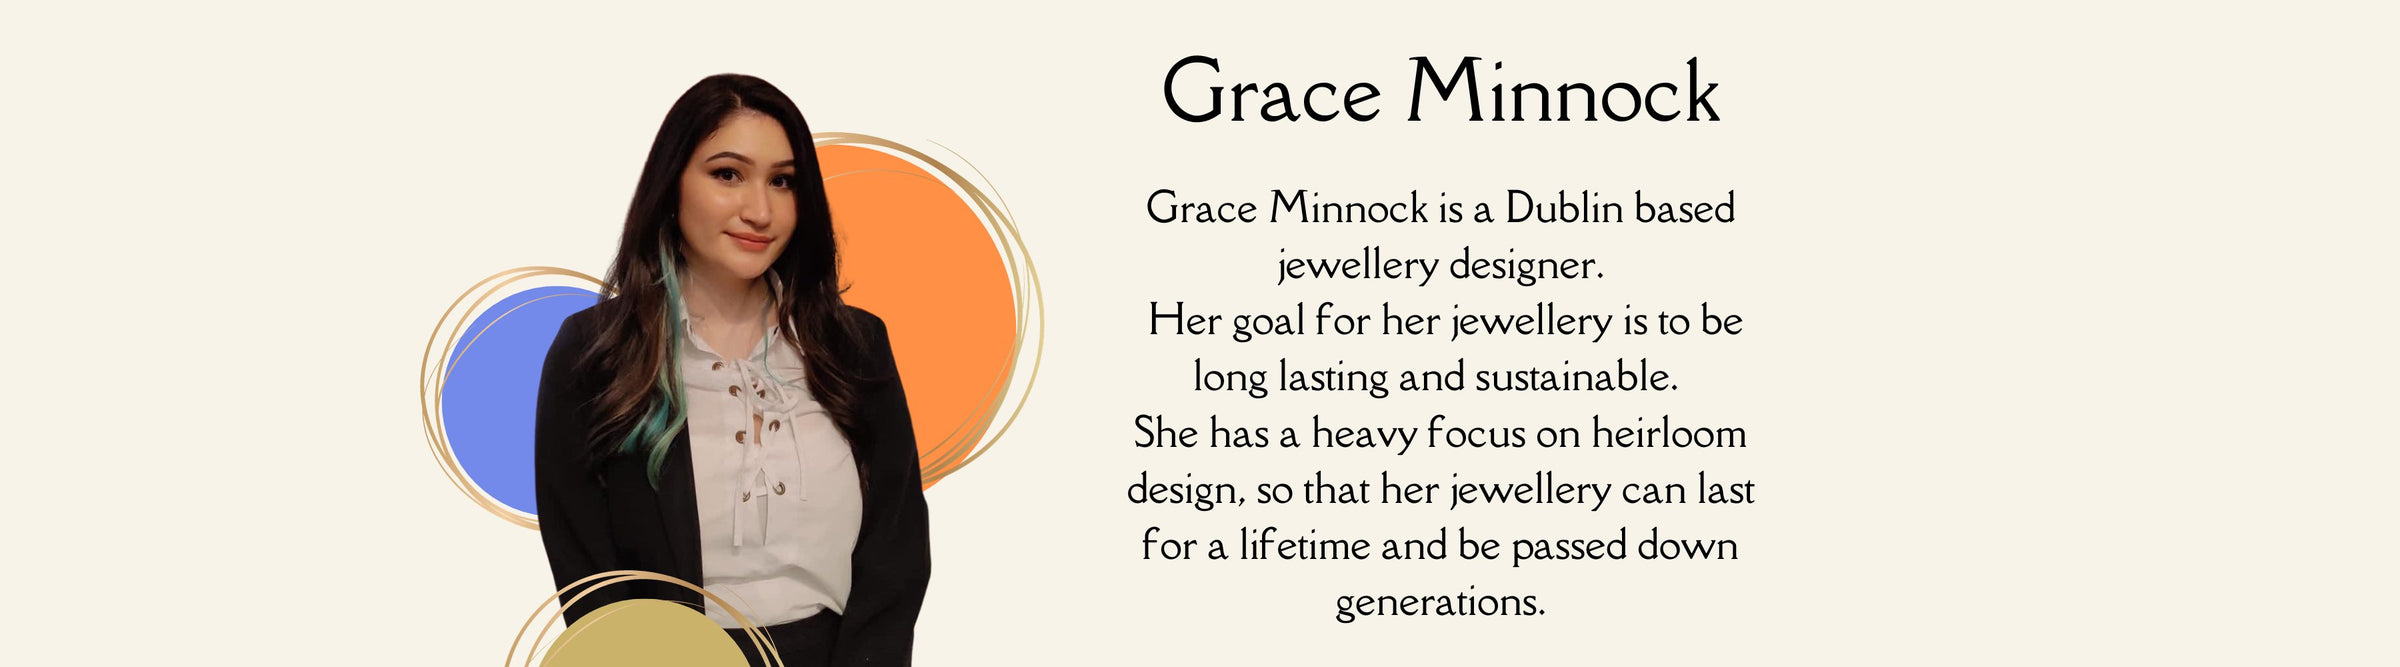 Grace Minnock is a Dublin based jewellery designer.  Her goal for her jewellery is to be long lasting and sustainable.  She has a heavy focus on heirloom design, so that her jewellery can last for a lifetime and be passed down generations.